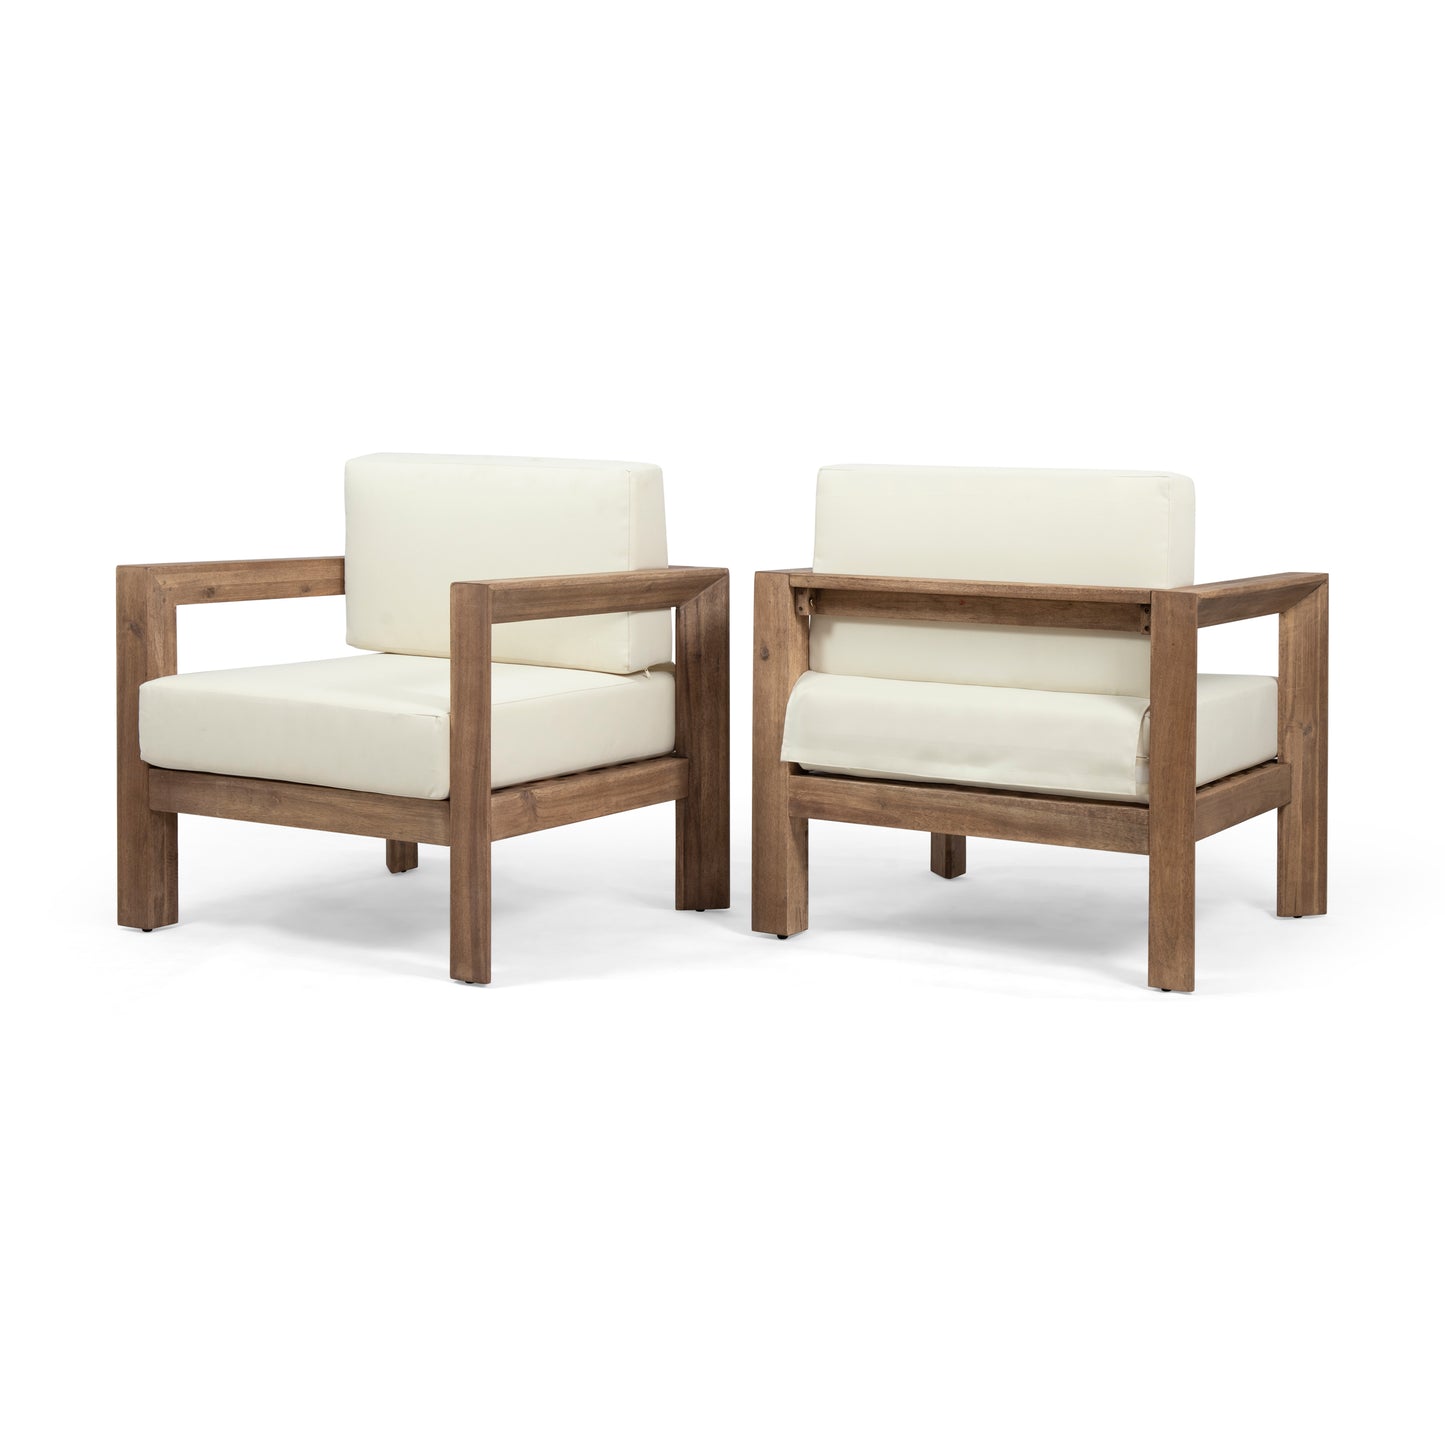 Lucia Outdoor Wooden Club Chairs with Cushions (Set of 2), Beige and Brown Finish